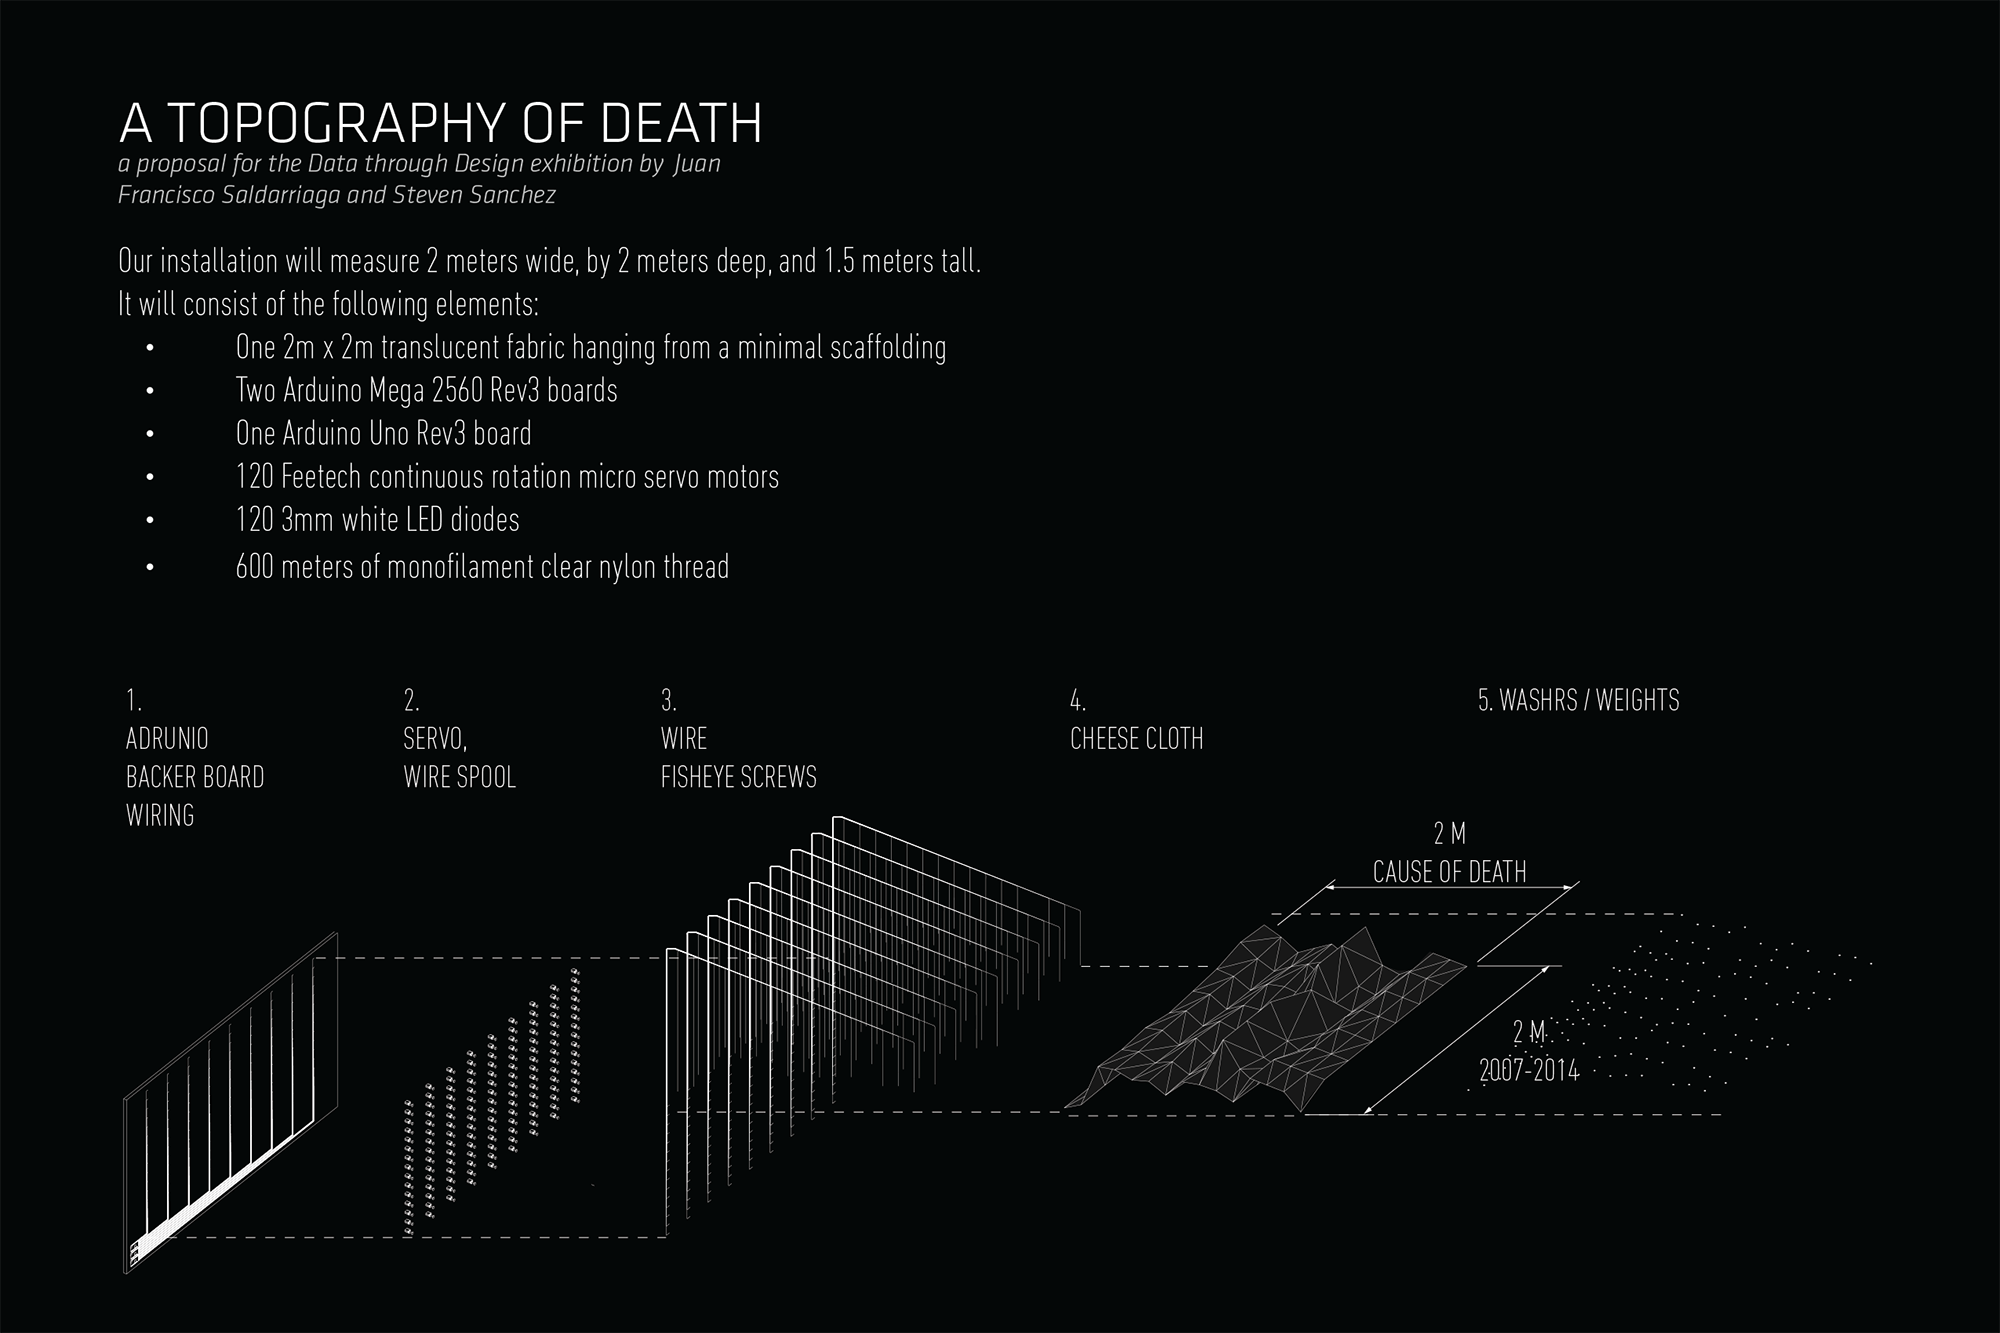 Topography of death